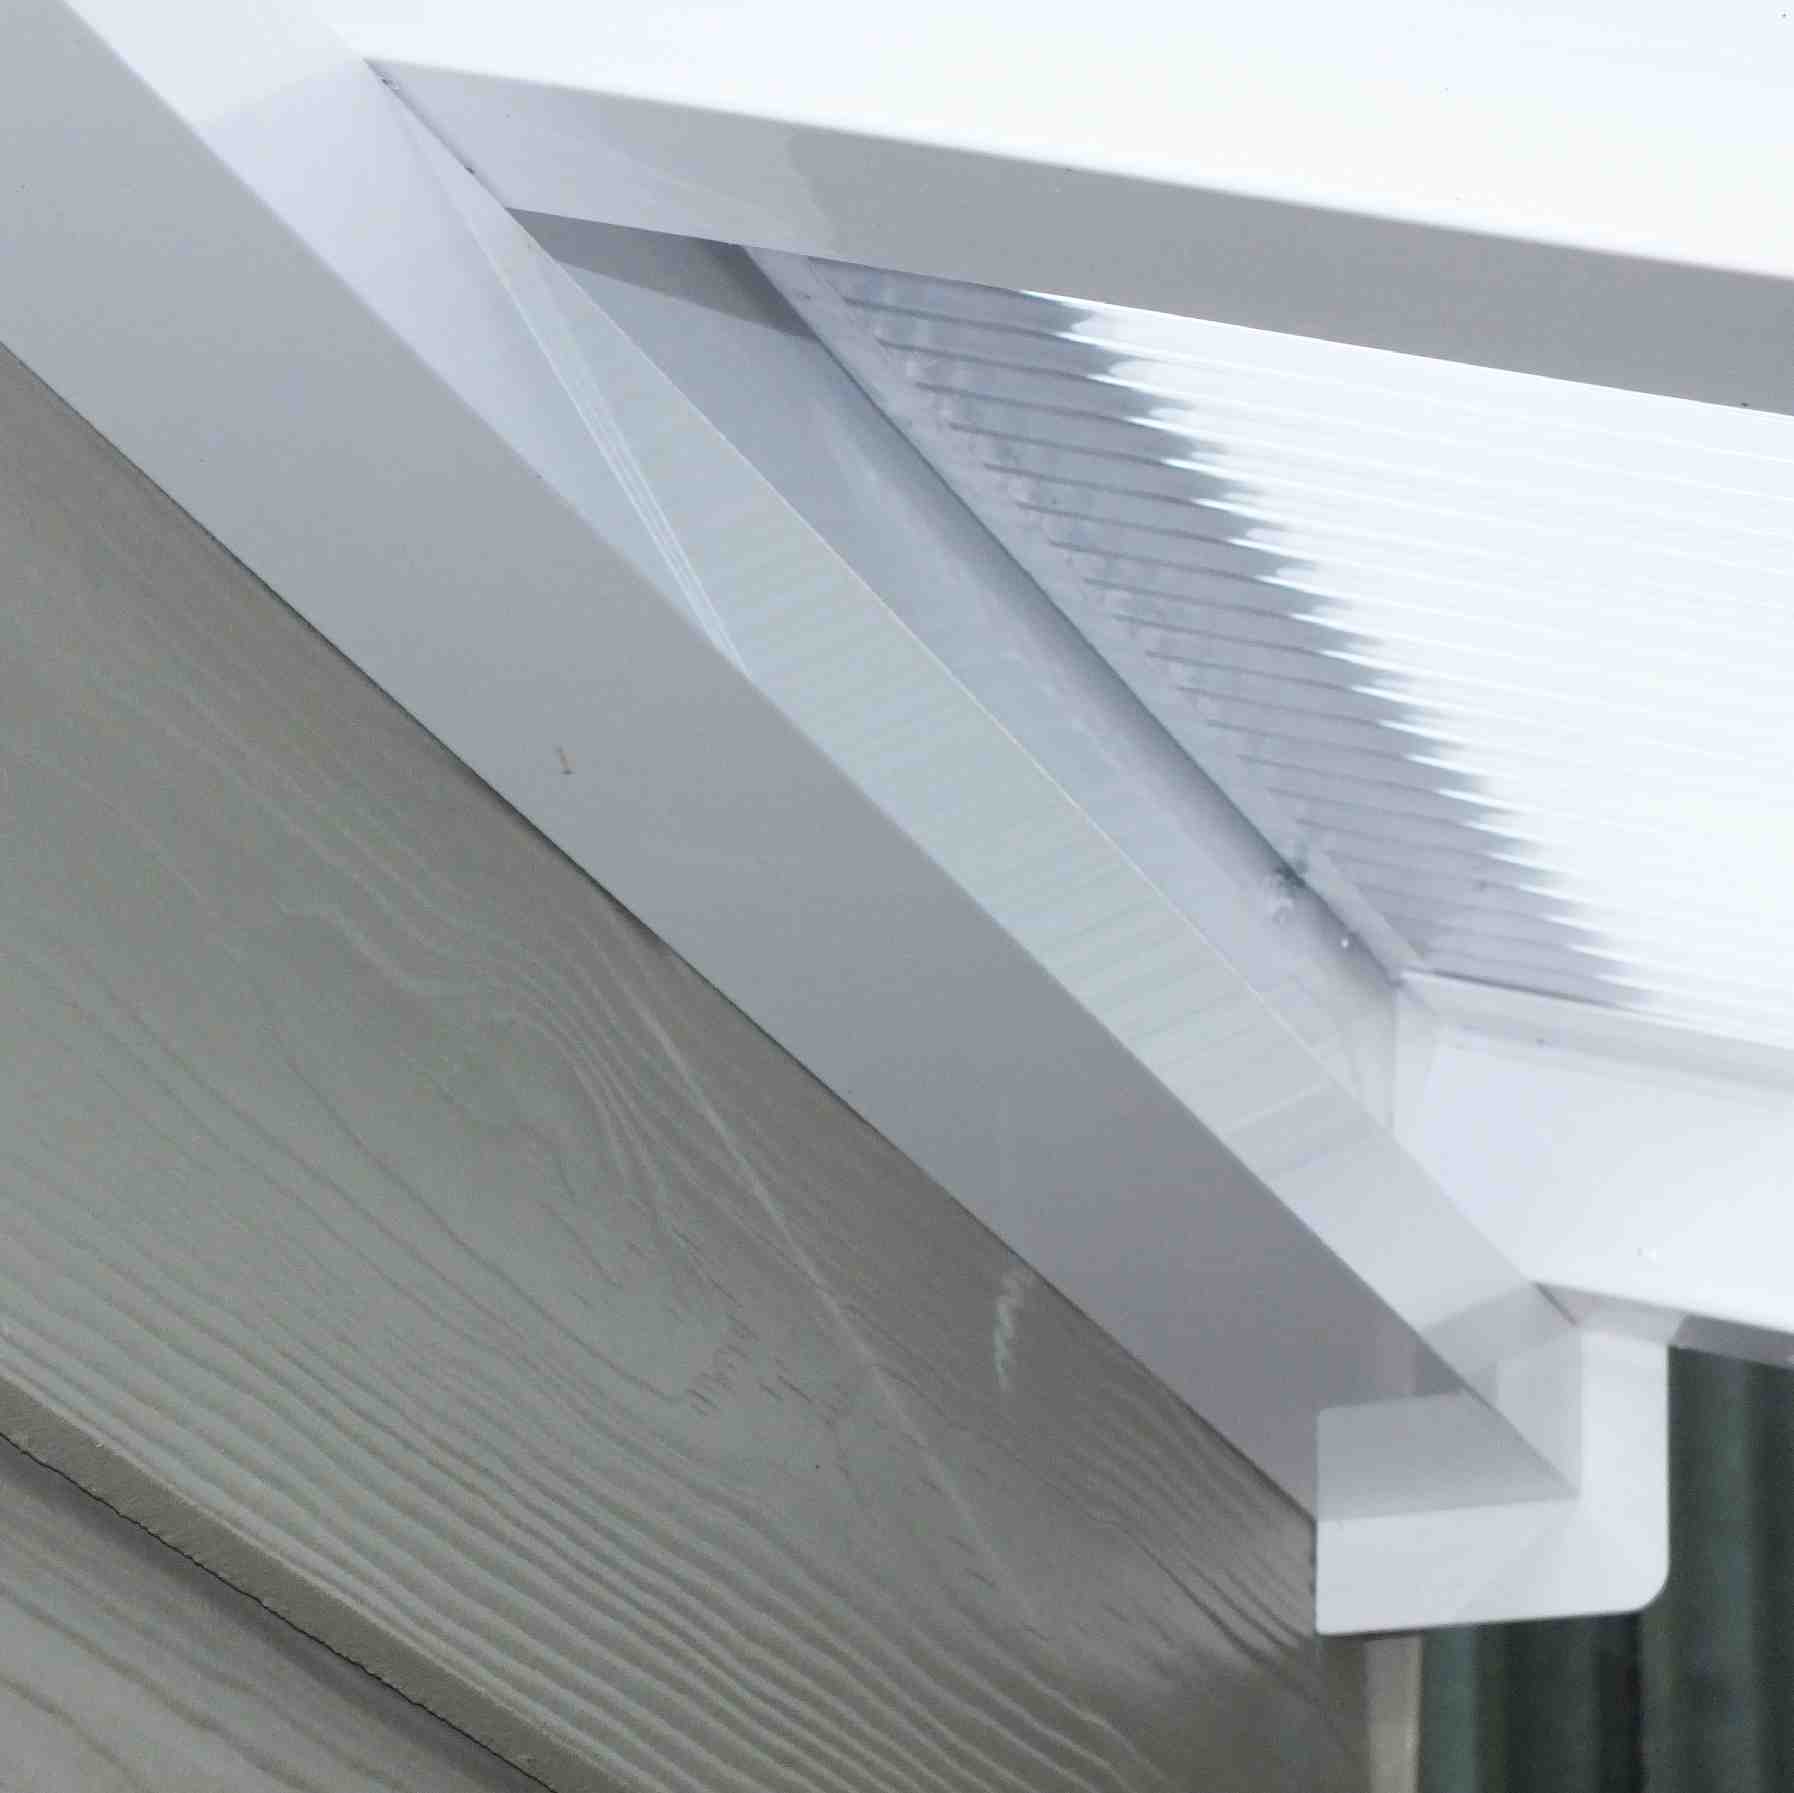 Great deals on Omega Verandah White with 16mm Polycarbonate Glazing - 11.6m (W) x 2.5m (P), (5) Supporting Posts